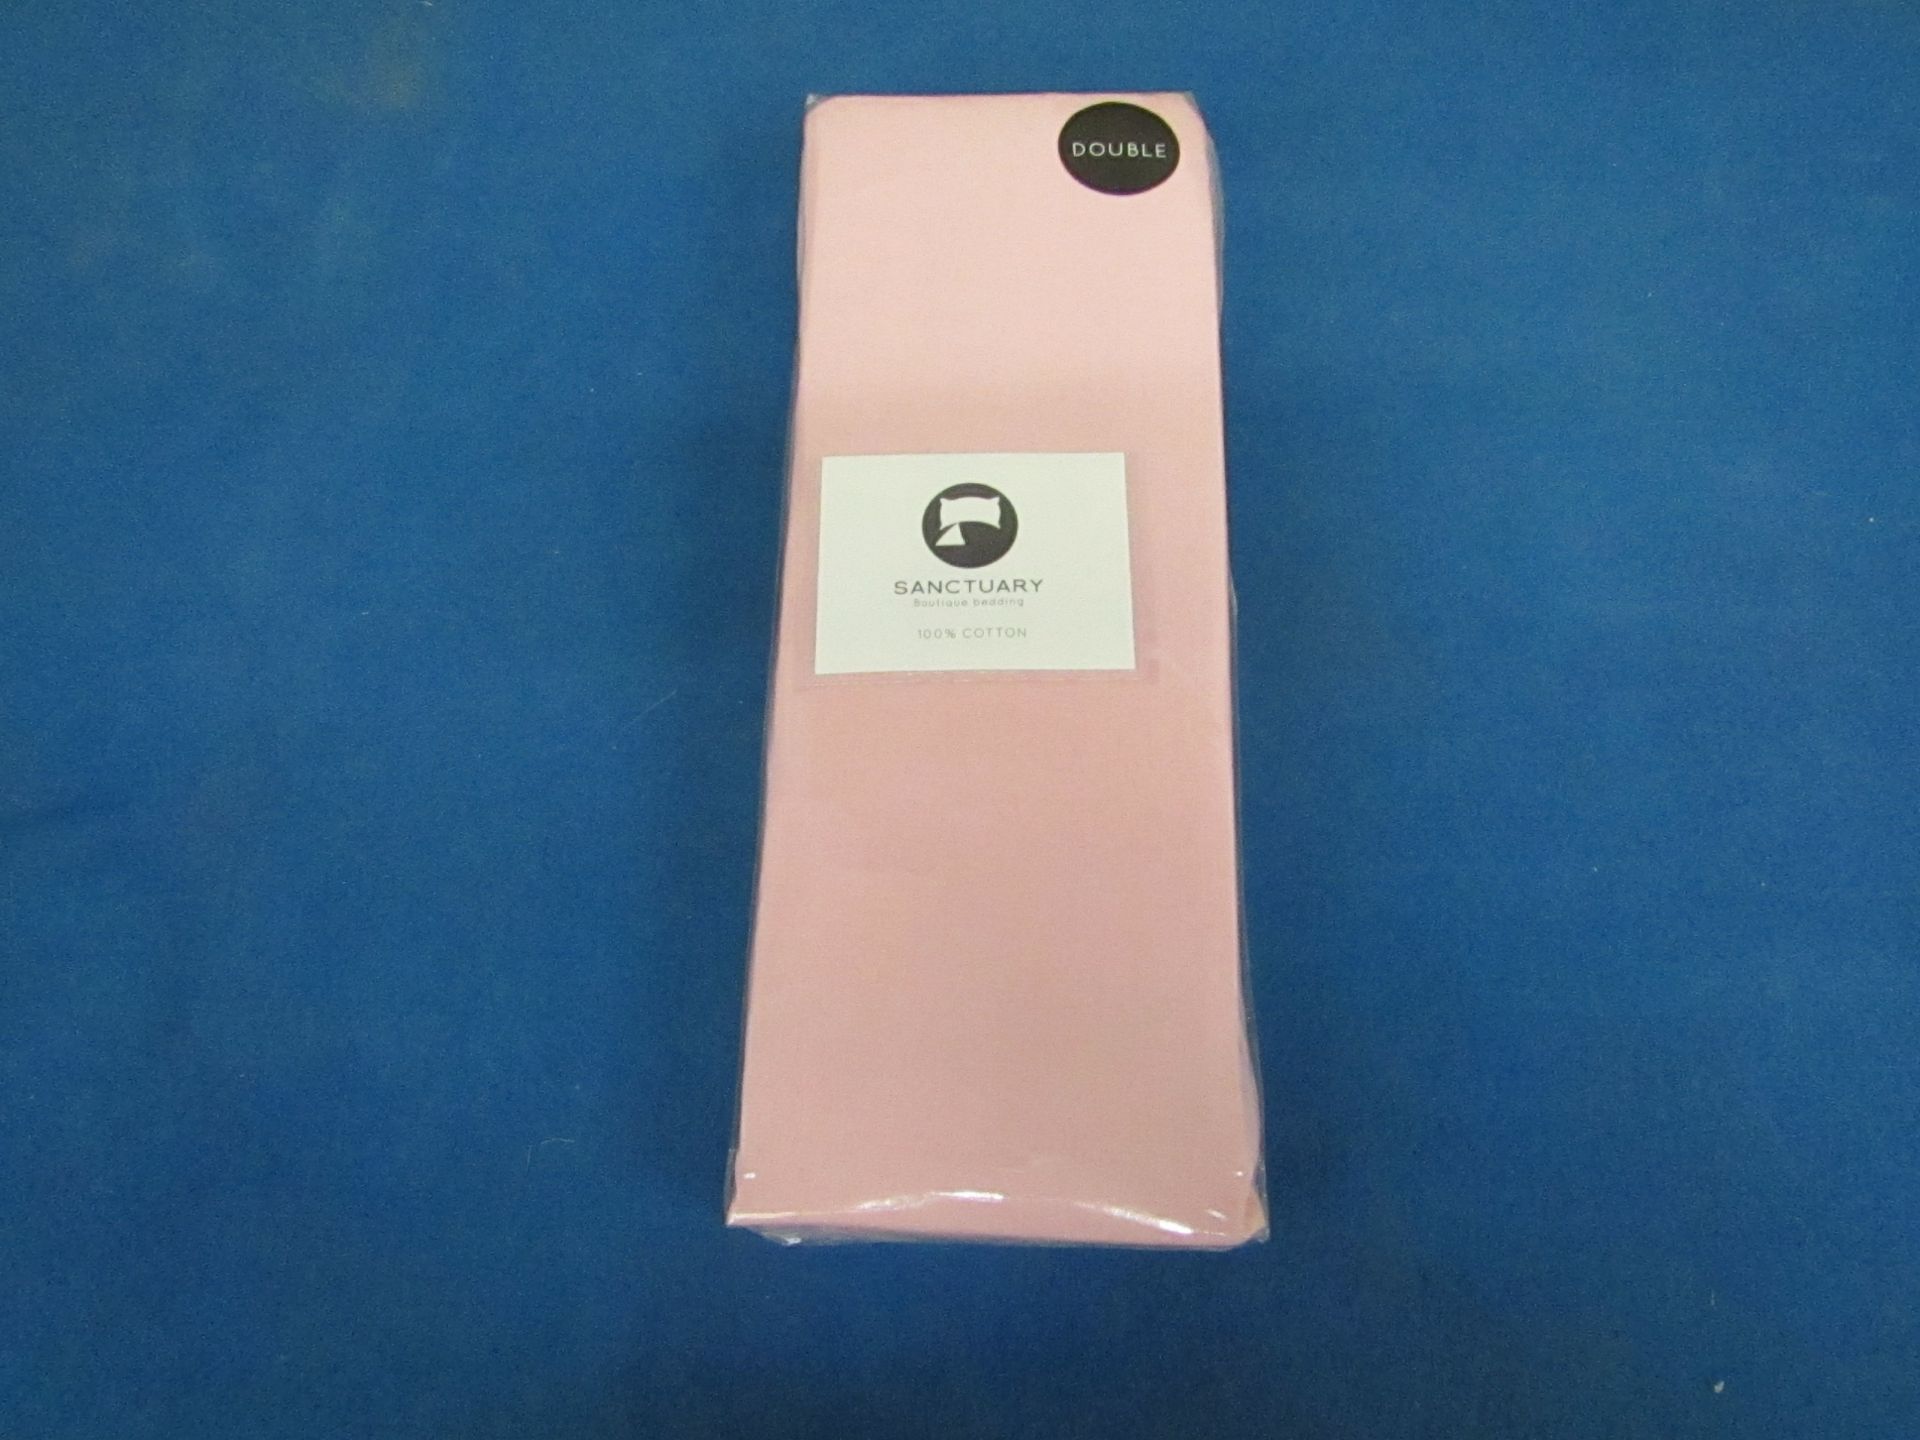 Sanctuary Fitted Sheet With Deep Box Blush Double 100 % Cotton RRP £20 new & Packaged